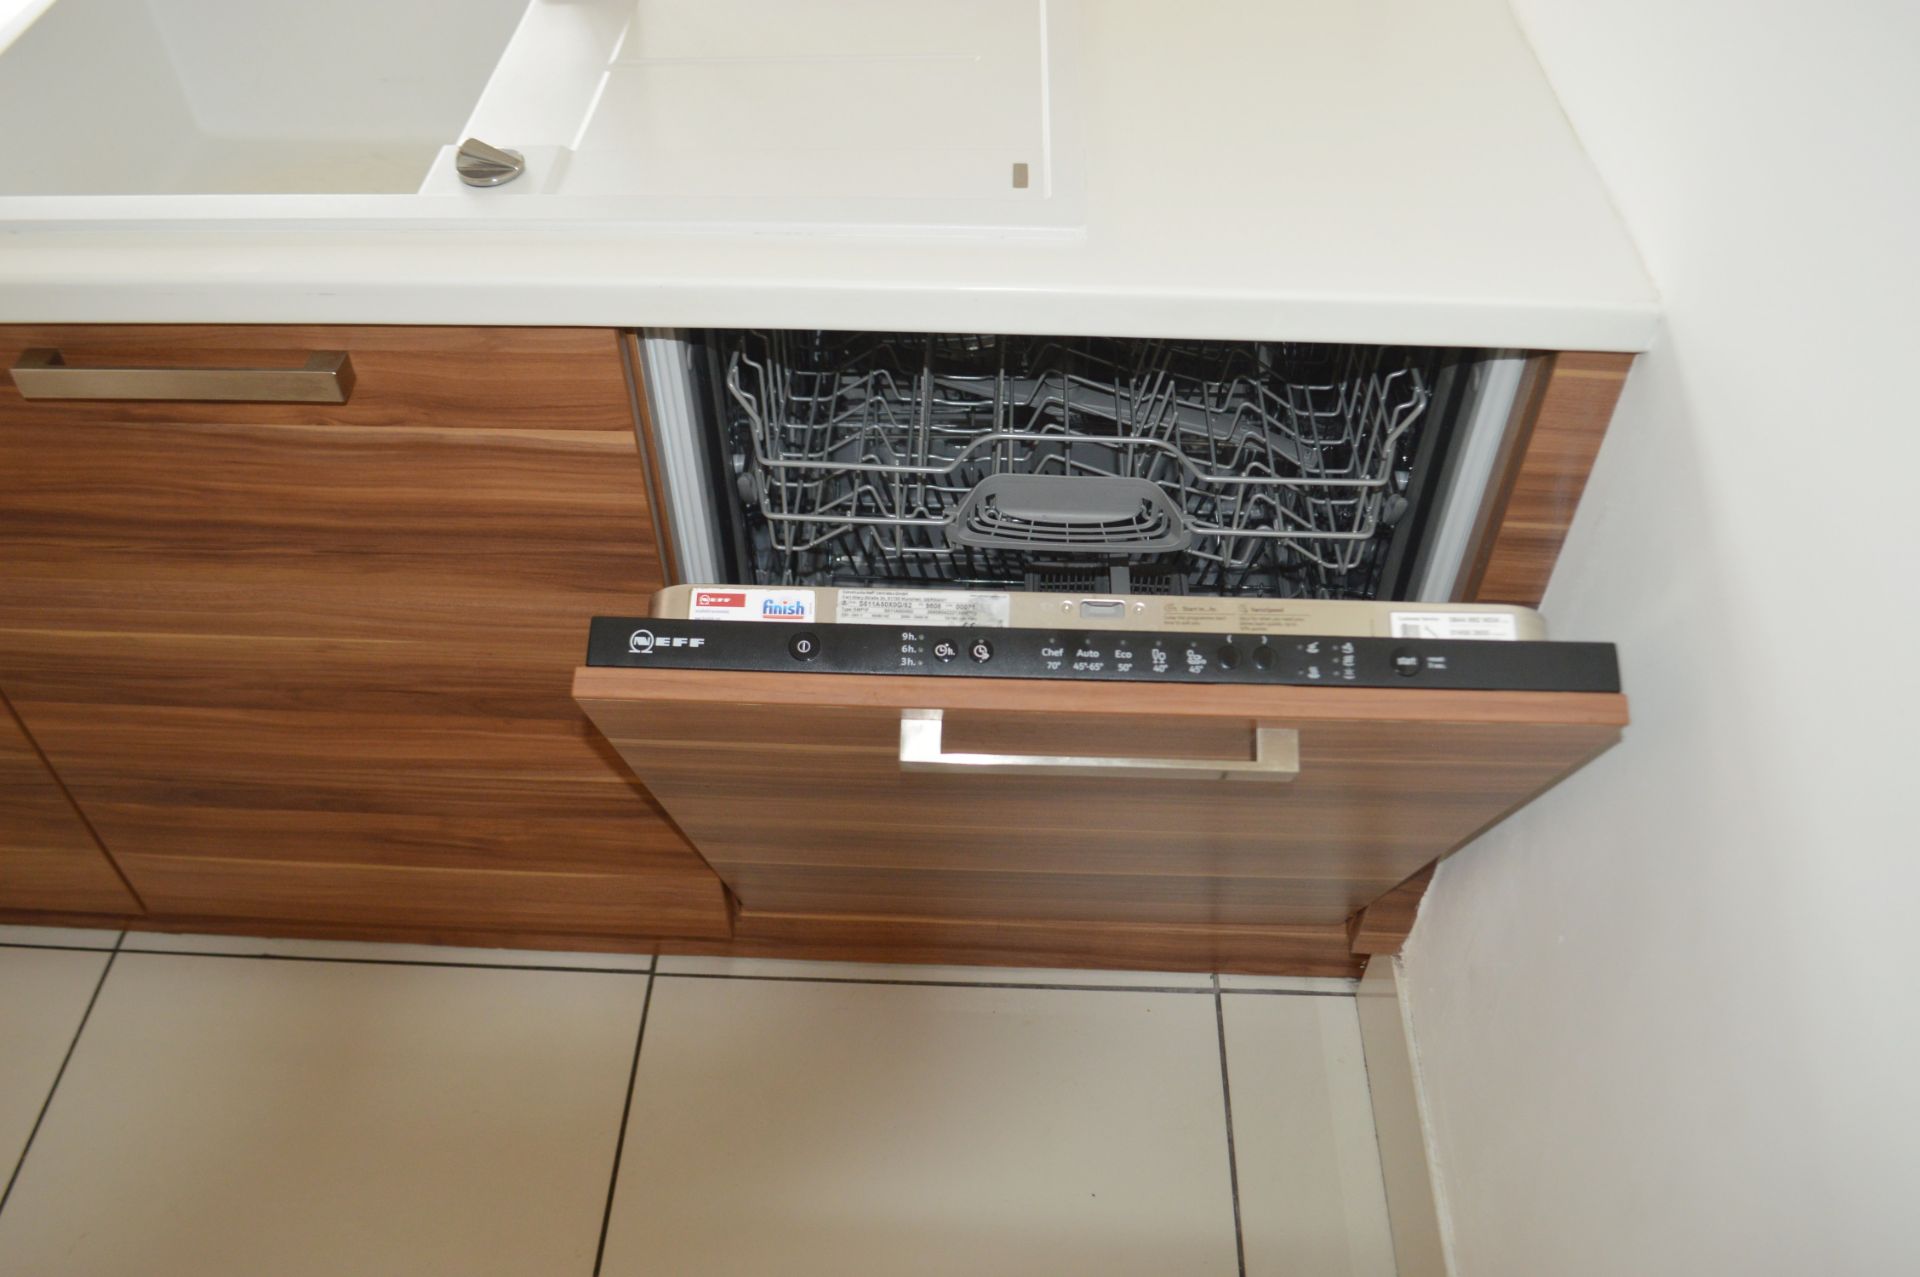 1 x Contemporary Bespoke Fitted Kitchen With Neff Branded Appliances - Collection Date: 1st November - Image 20 of 52